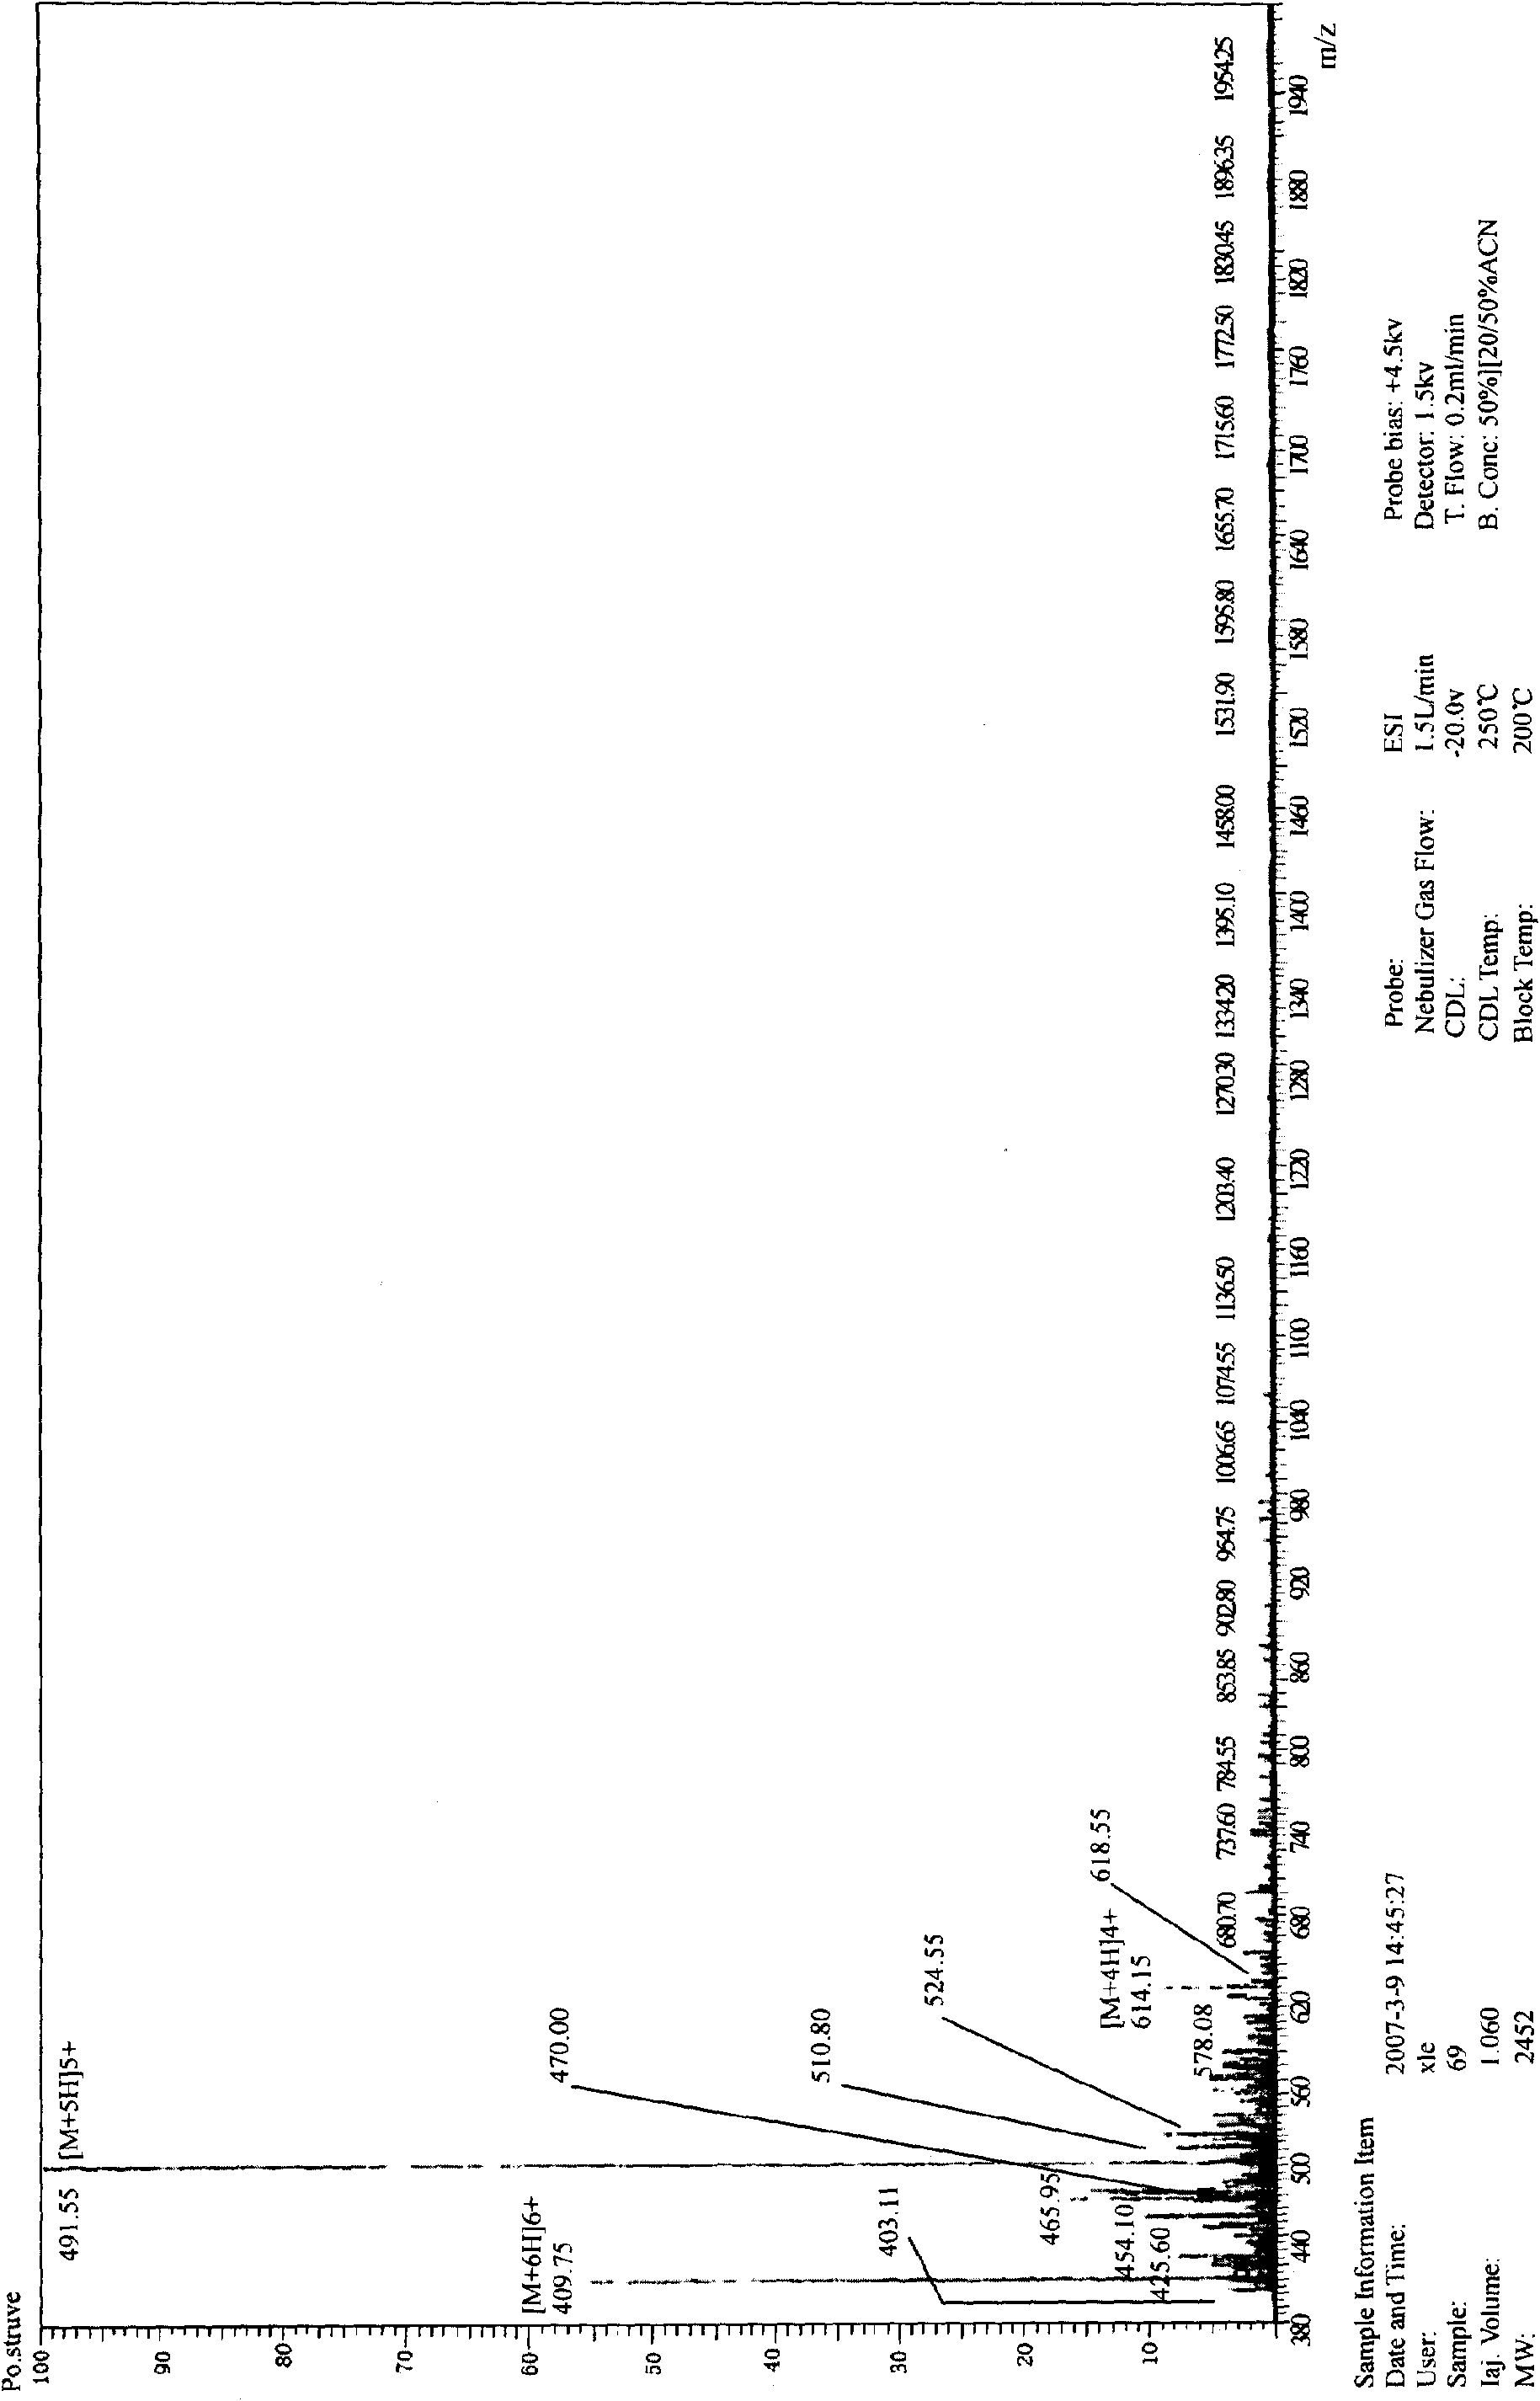 Synthetic antibacterial peptide and preparation method and application thereof